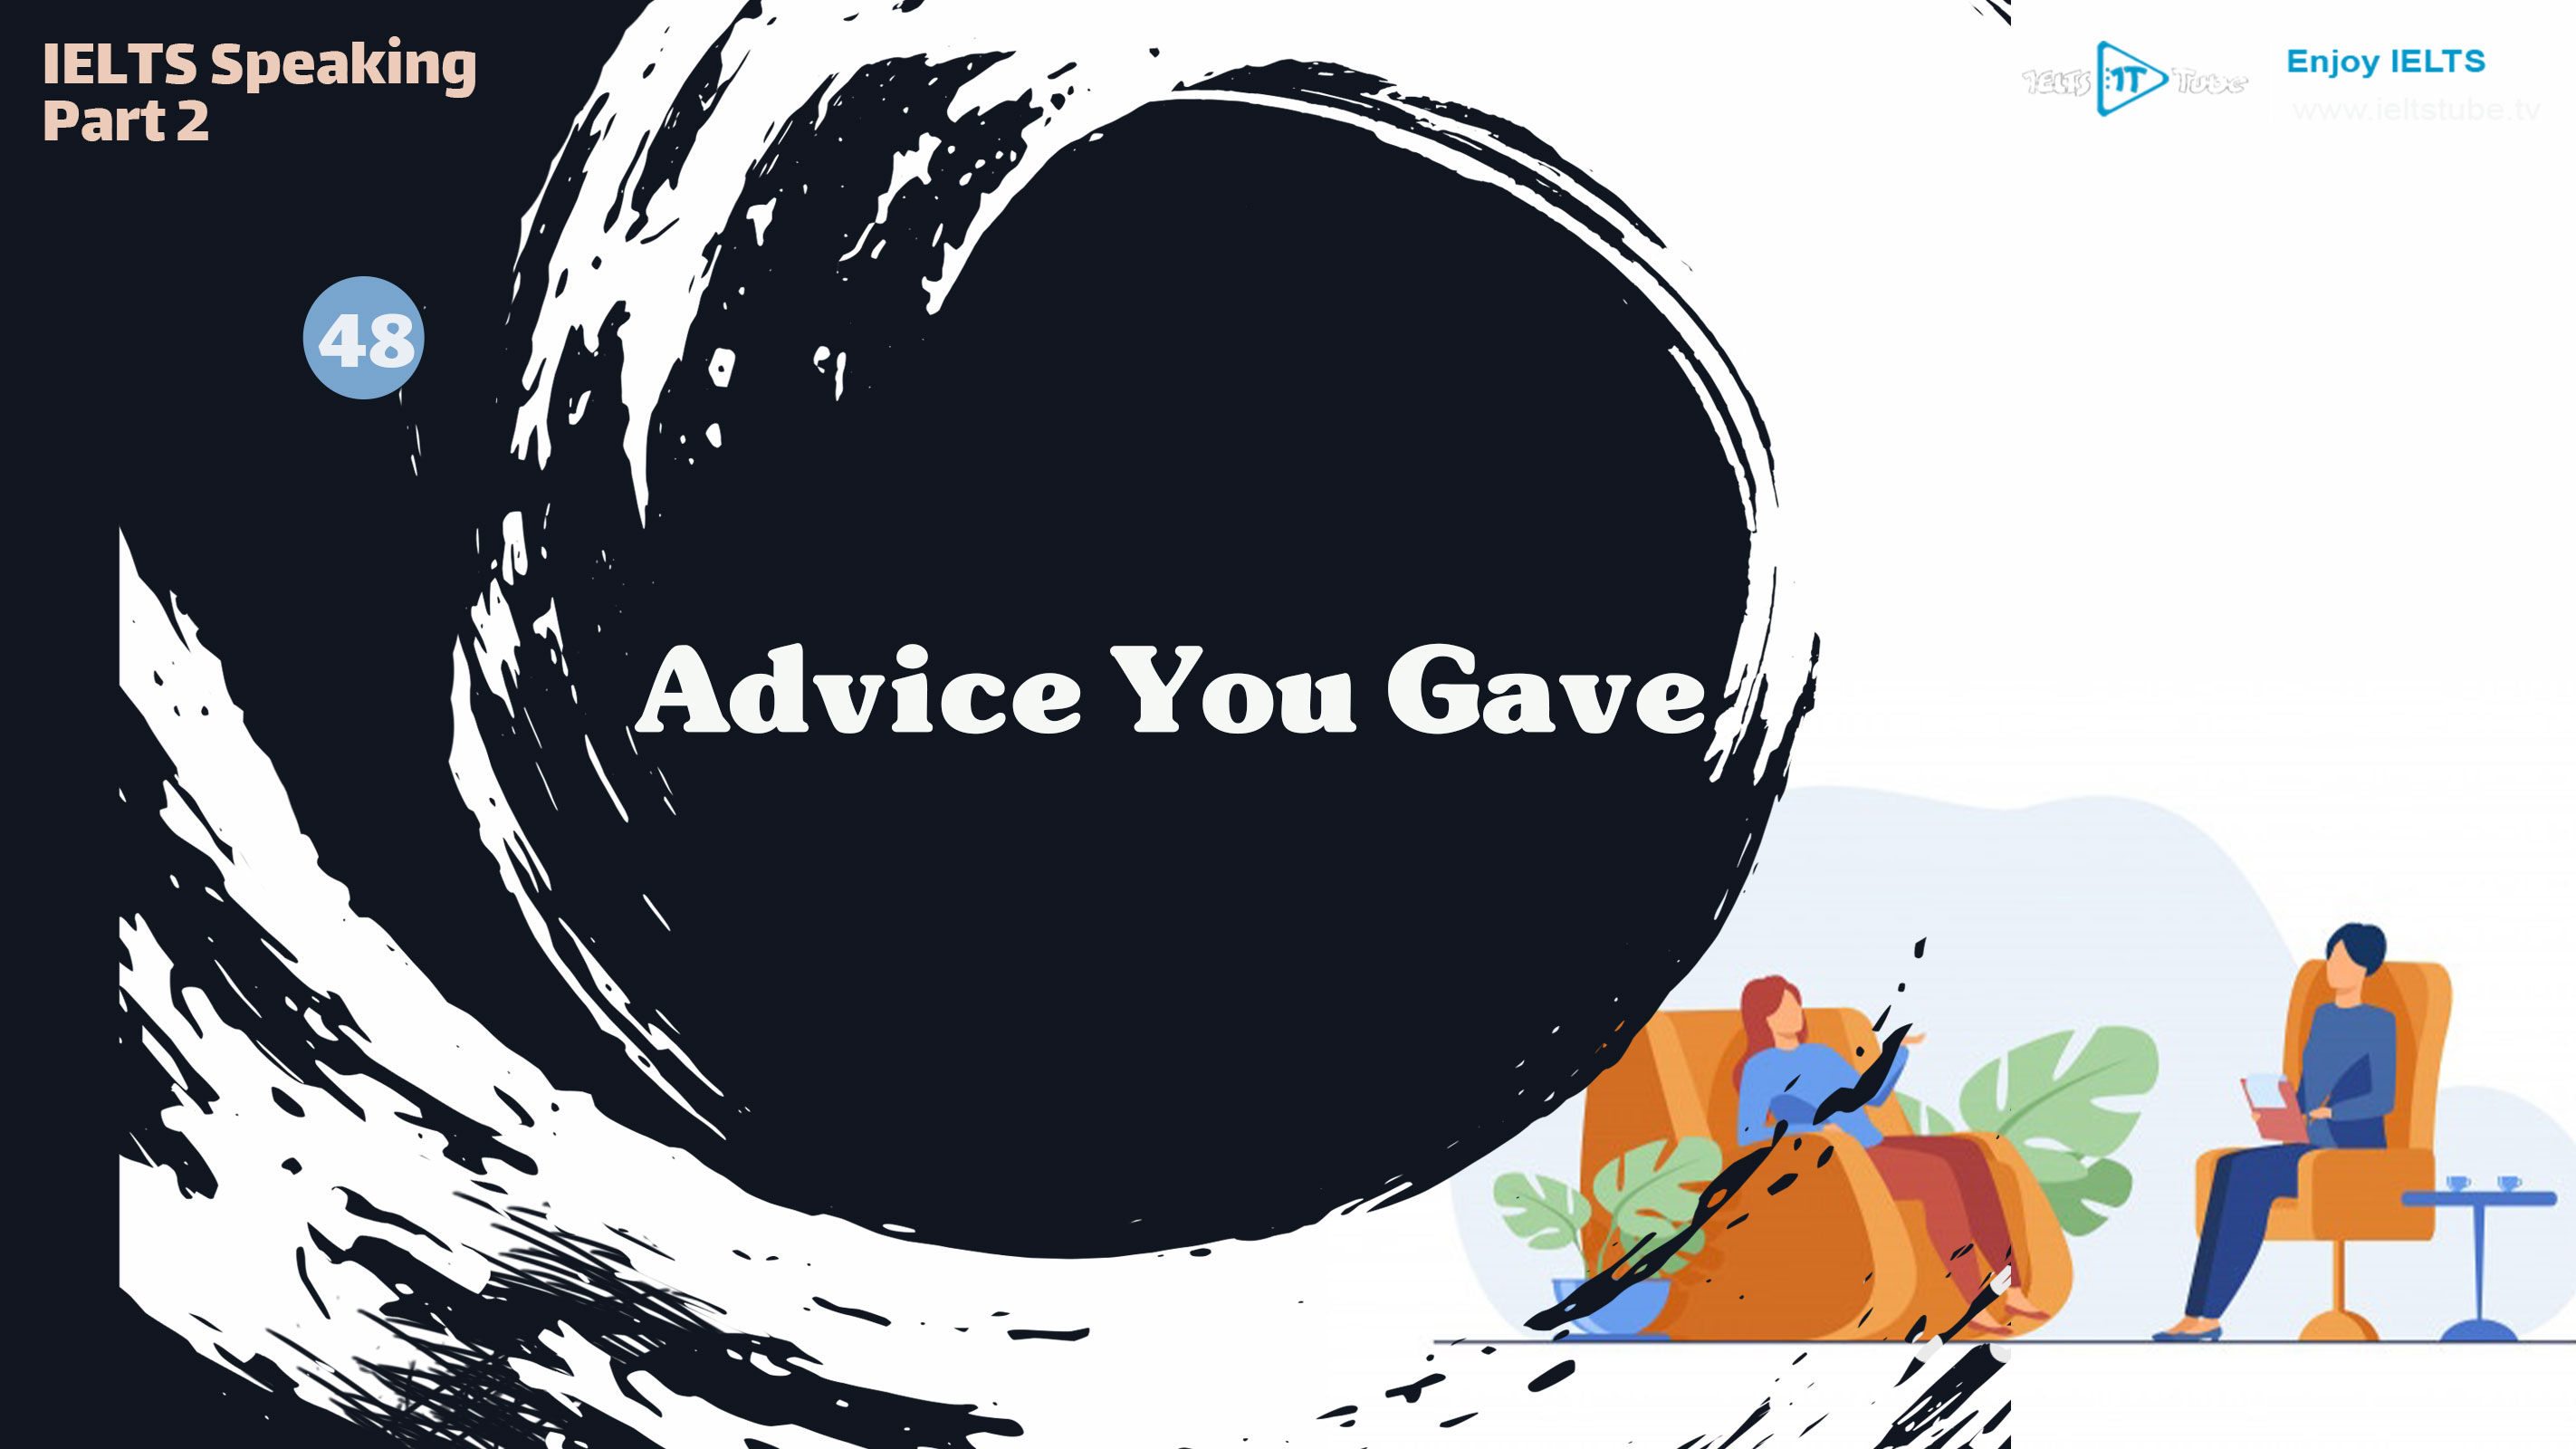 Advice You Gave (Poster)